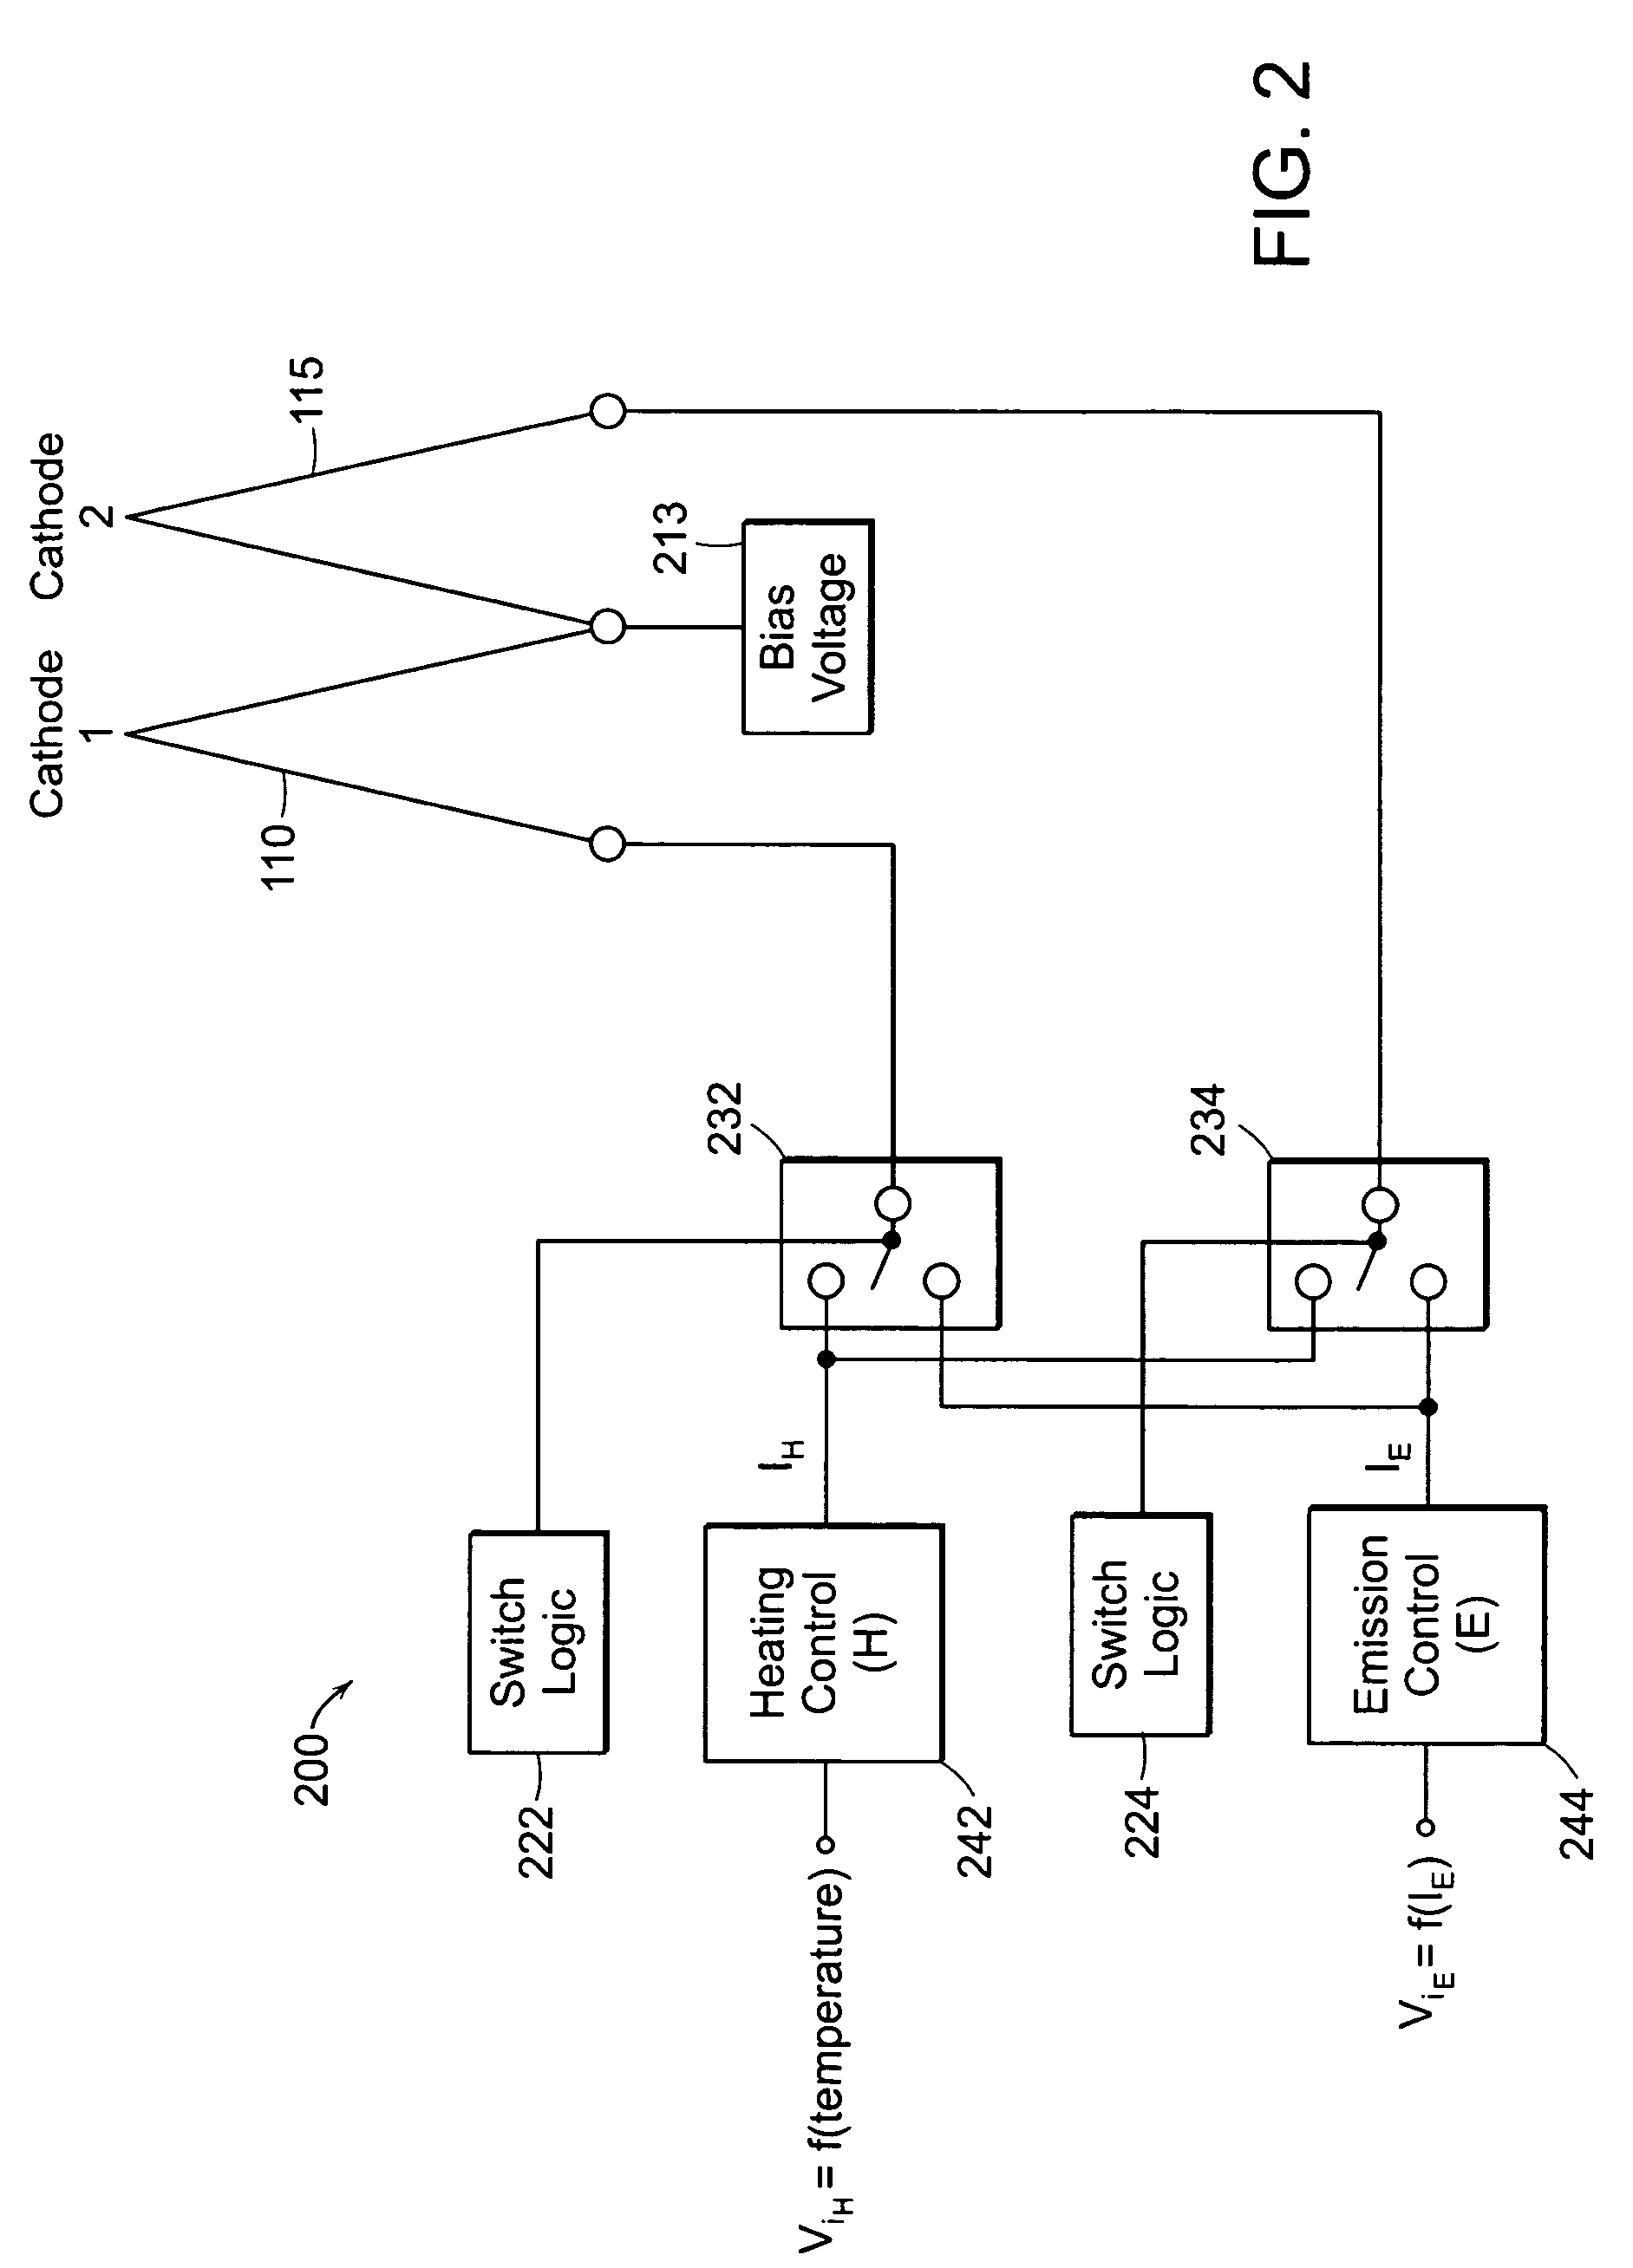 Method and apparatus for maintaining emission capabilities of hot cathodes in harsh environments